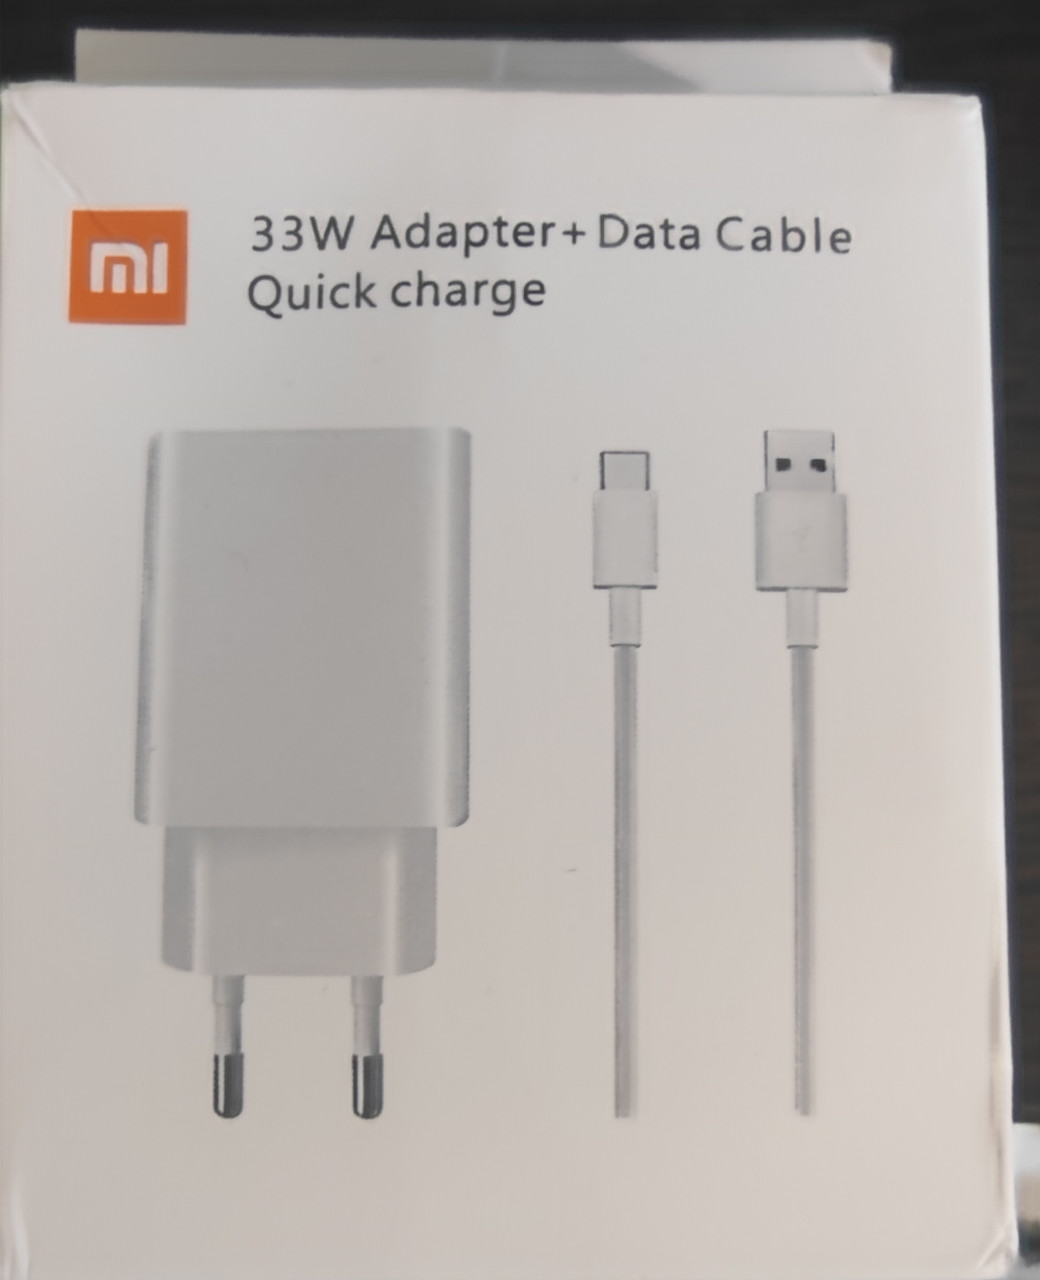 33W Adapter Date Cable Quick charge